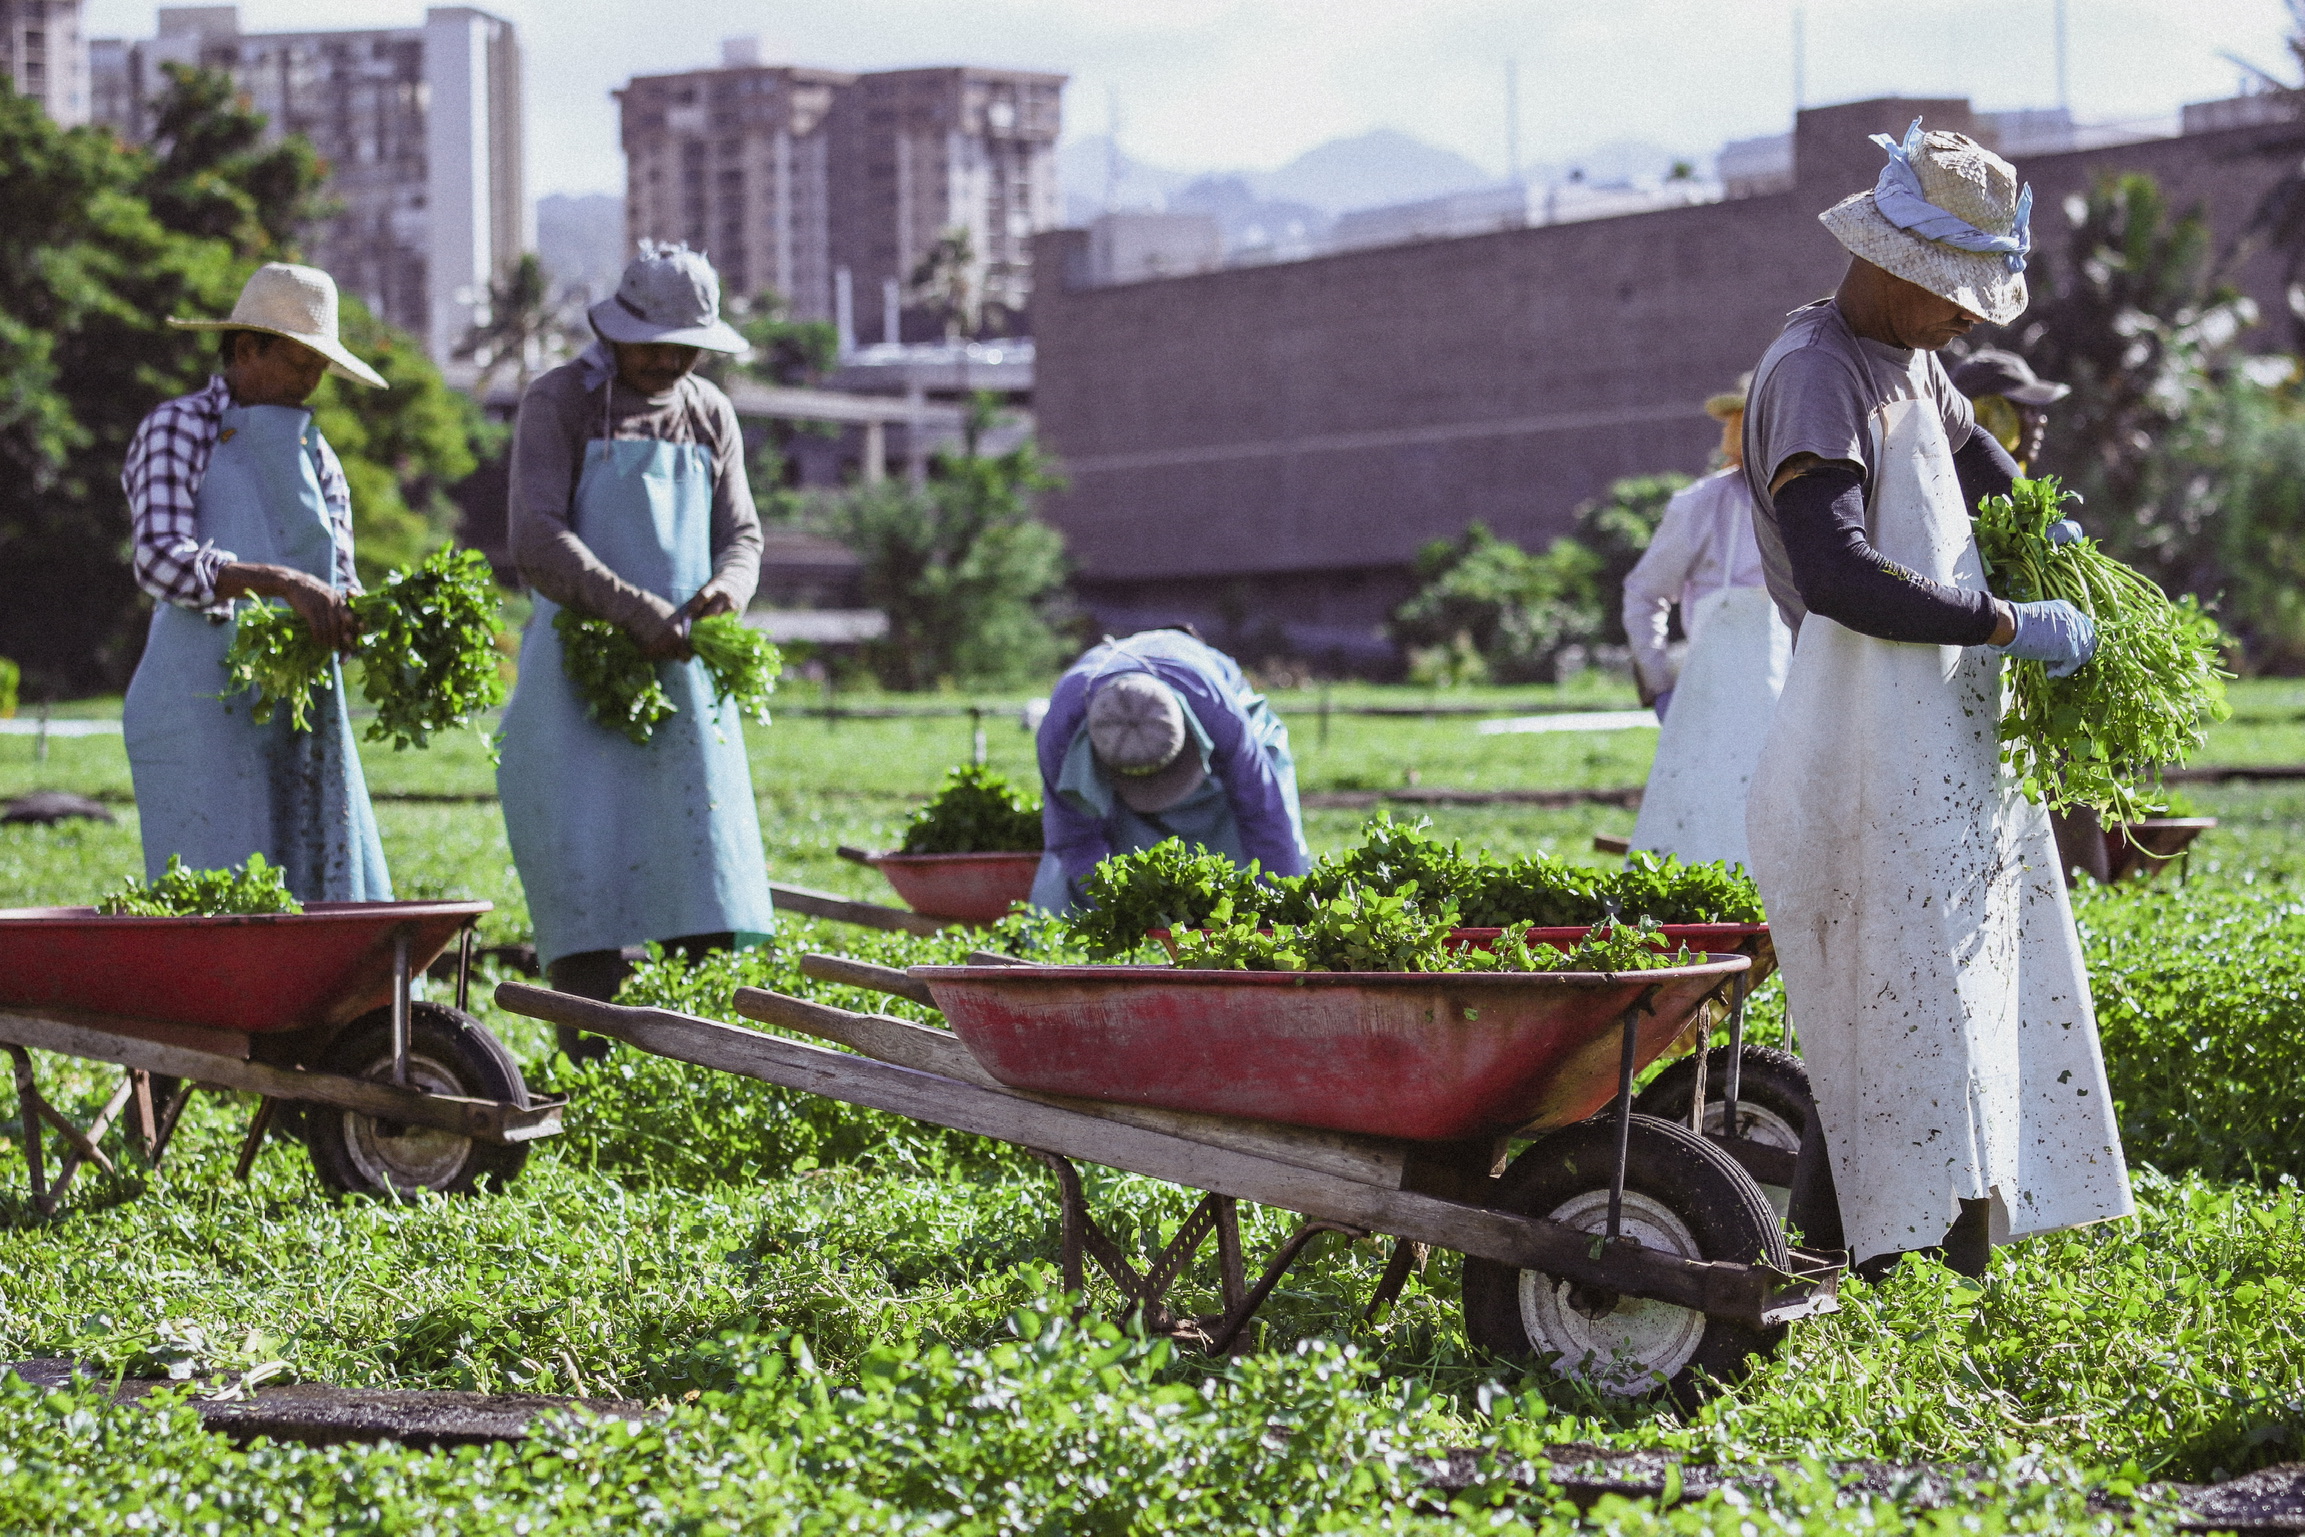 Sumida Farm employees hand plant, harvest, and prepare watercress for market in much the same way they have for more than 90 years. Buildings of urban Honolulu in background